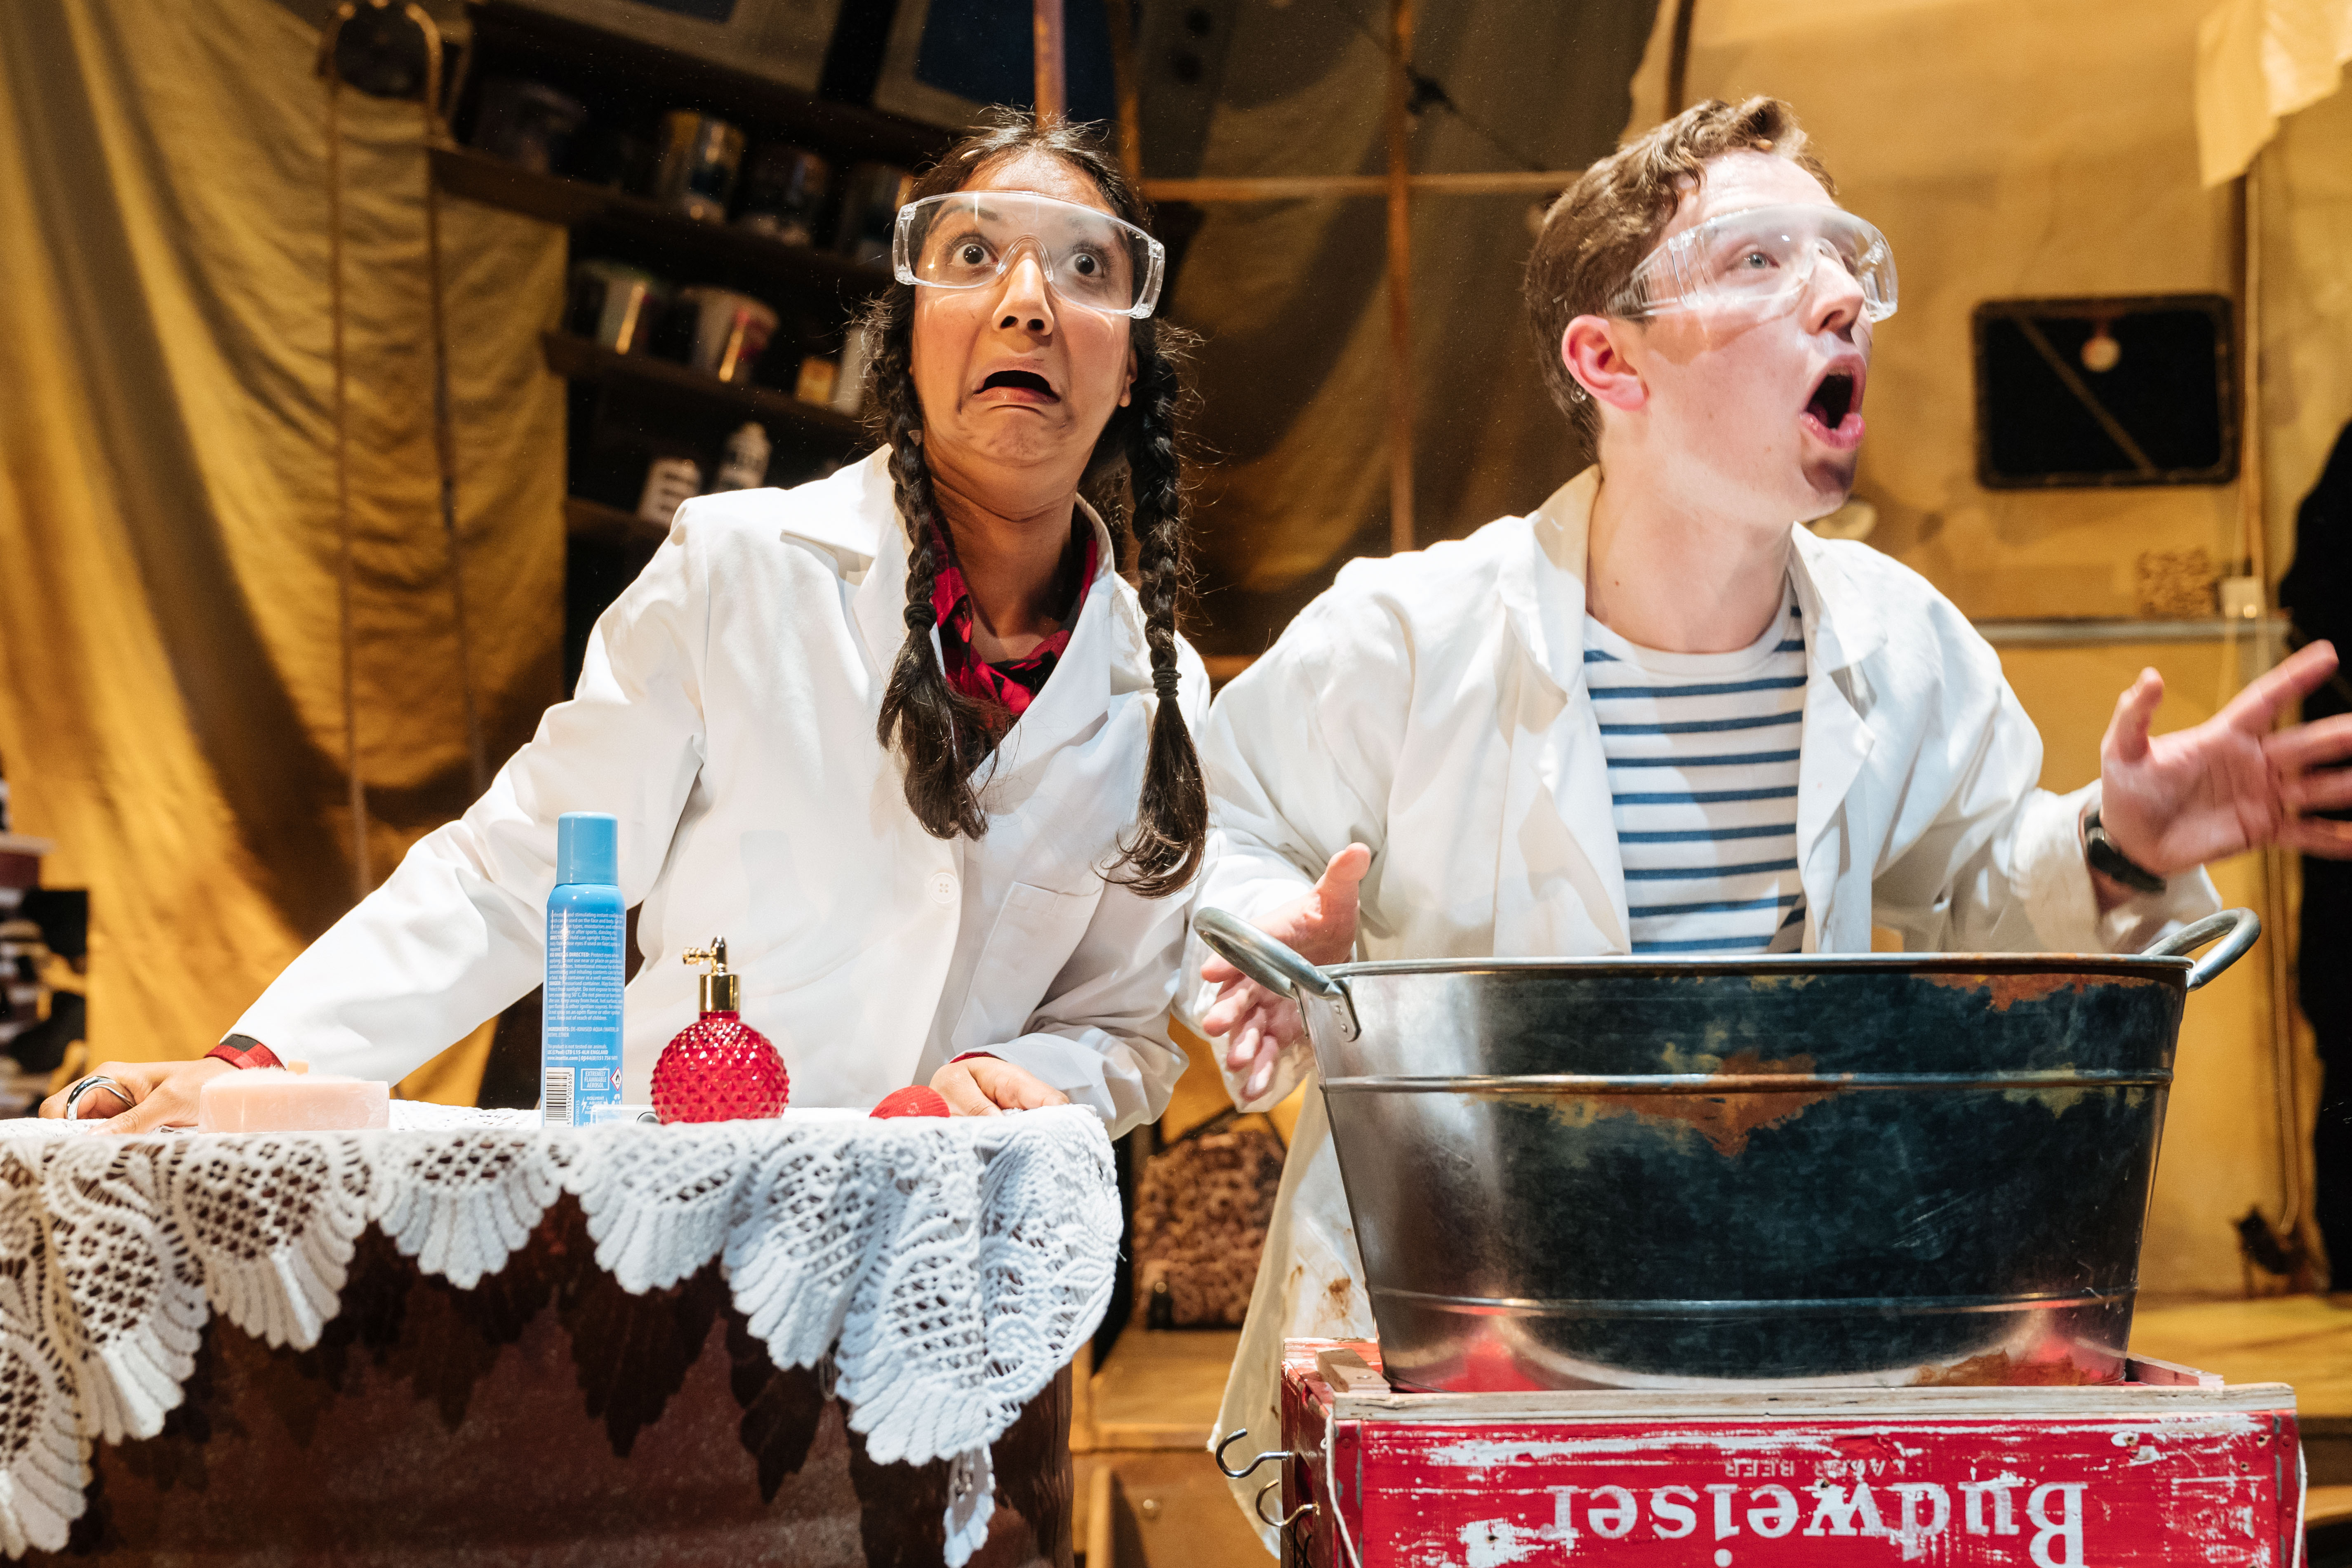 Production image from George's Marvellous Medicine. A scientist (Chandni Mistry) and George (Preston Nyman) exclaim to the audience as they mix a potion in a large steel basin, wearing white lab coats and clear safety goggles.